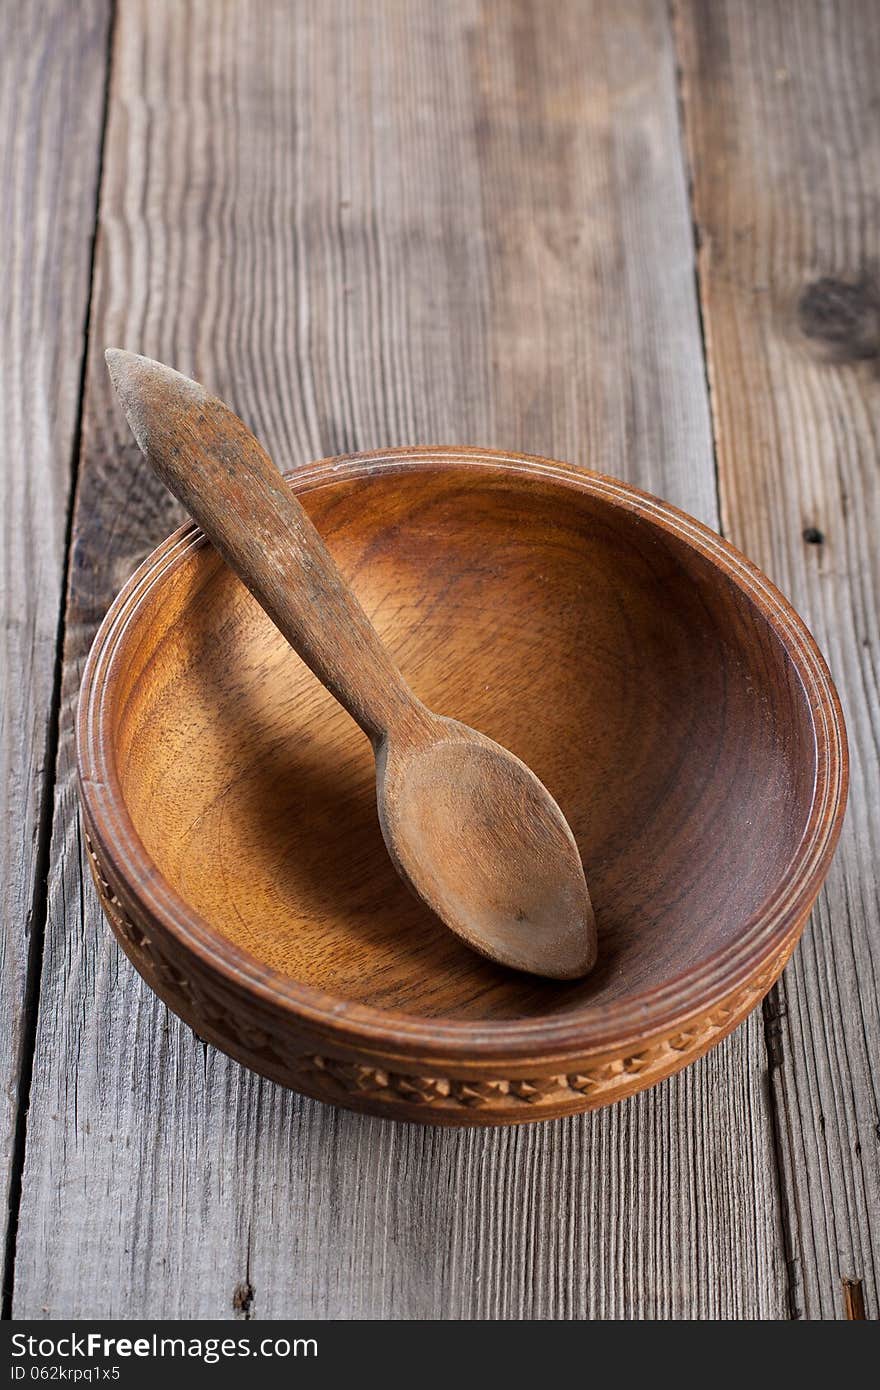 Wooden spoon and a bowl on a wooden background. Wooden spoon and a bowl on a wooden background